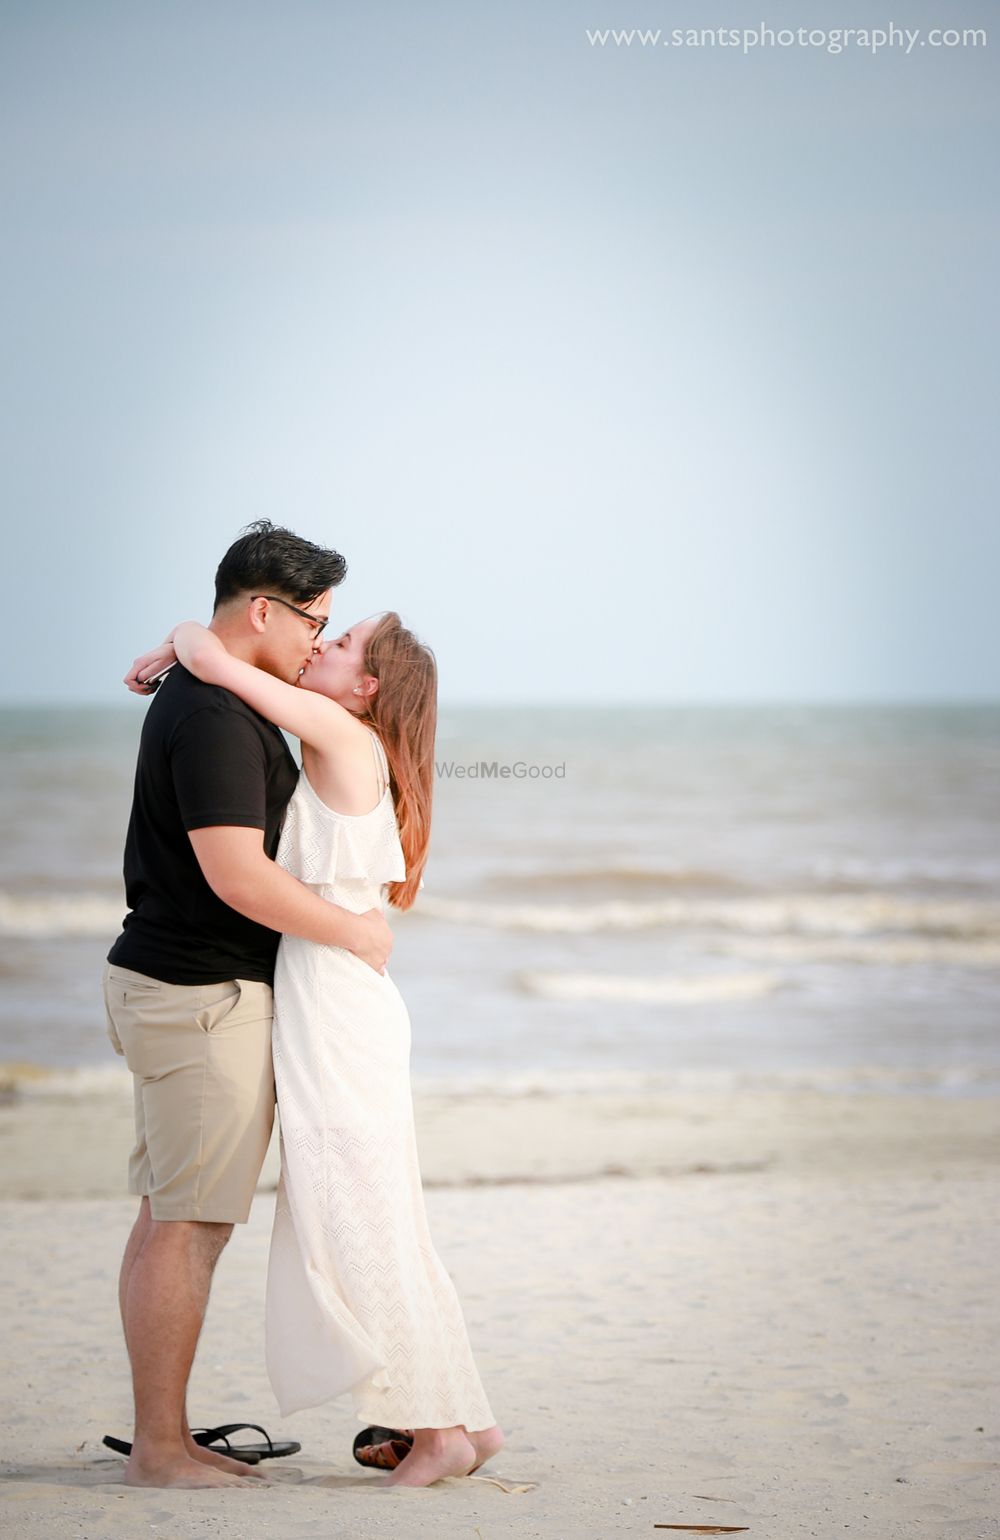 Photo From Kevin's Proposal - By Sants Photography